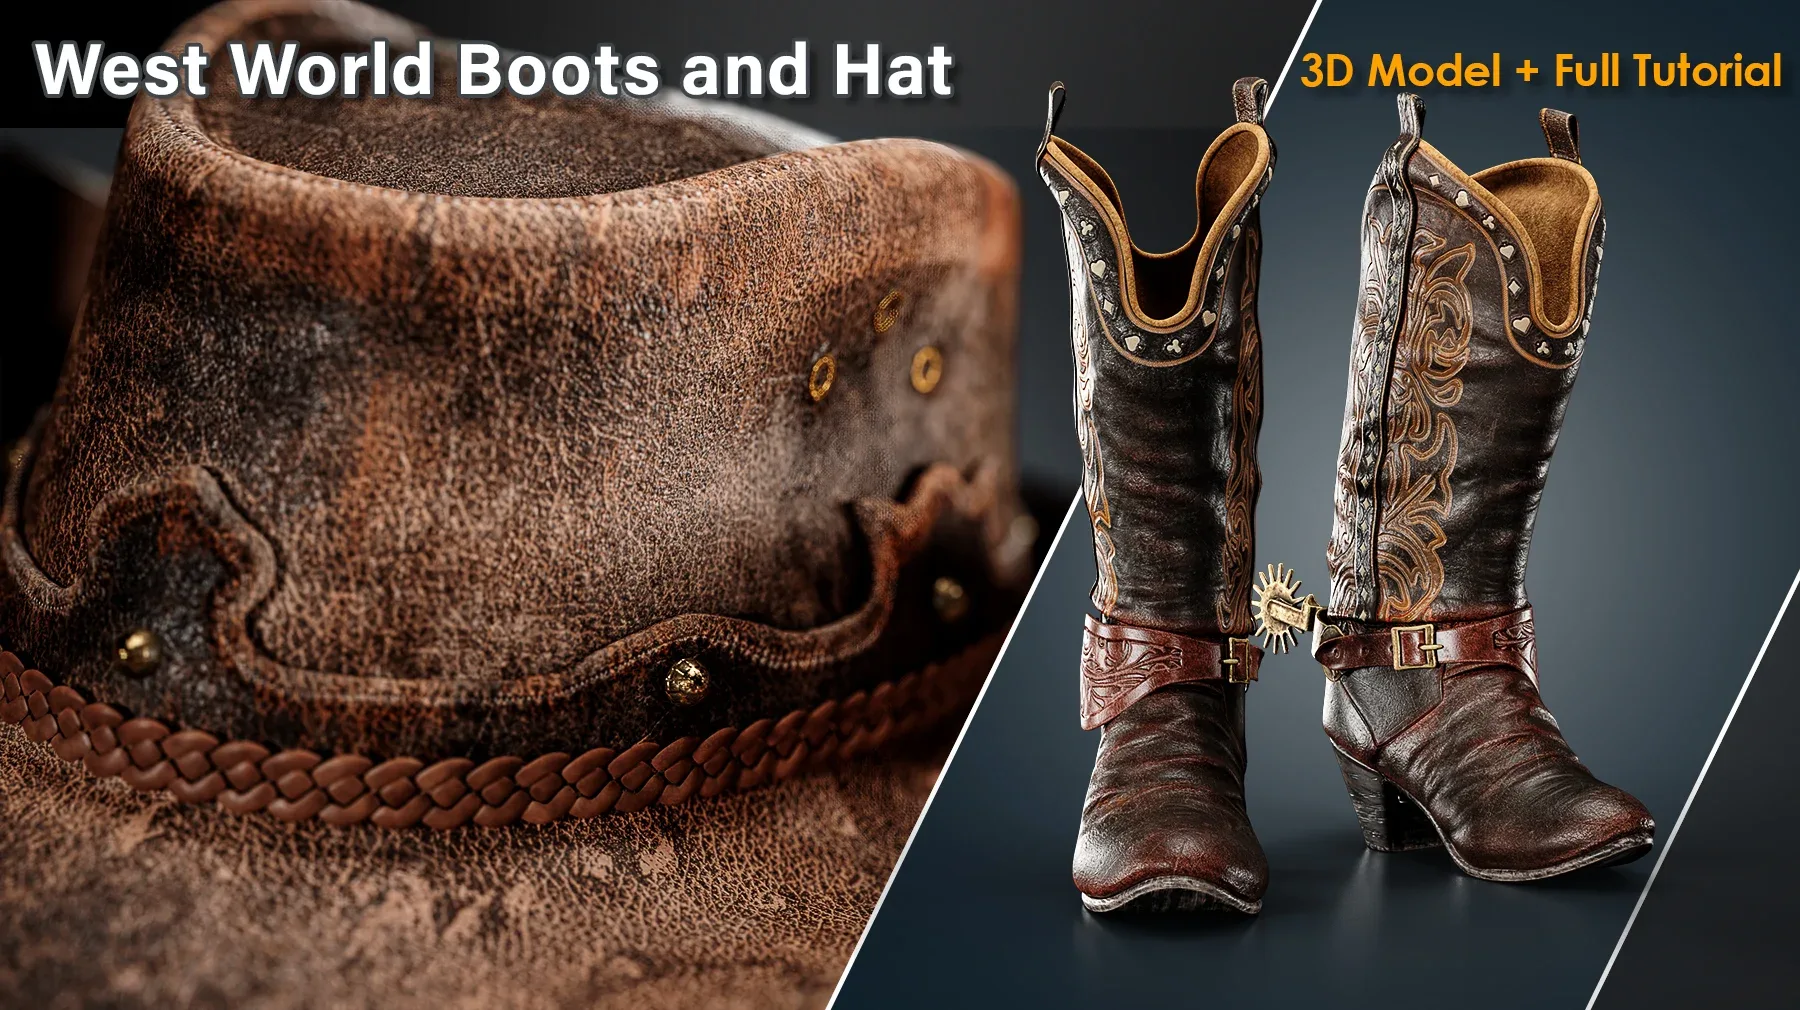 West World Boots and Hat / 3D Model + full Tutorial